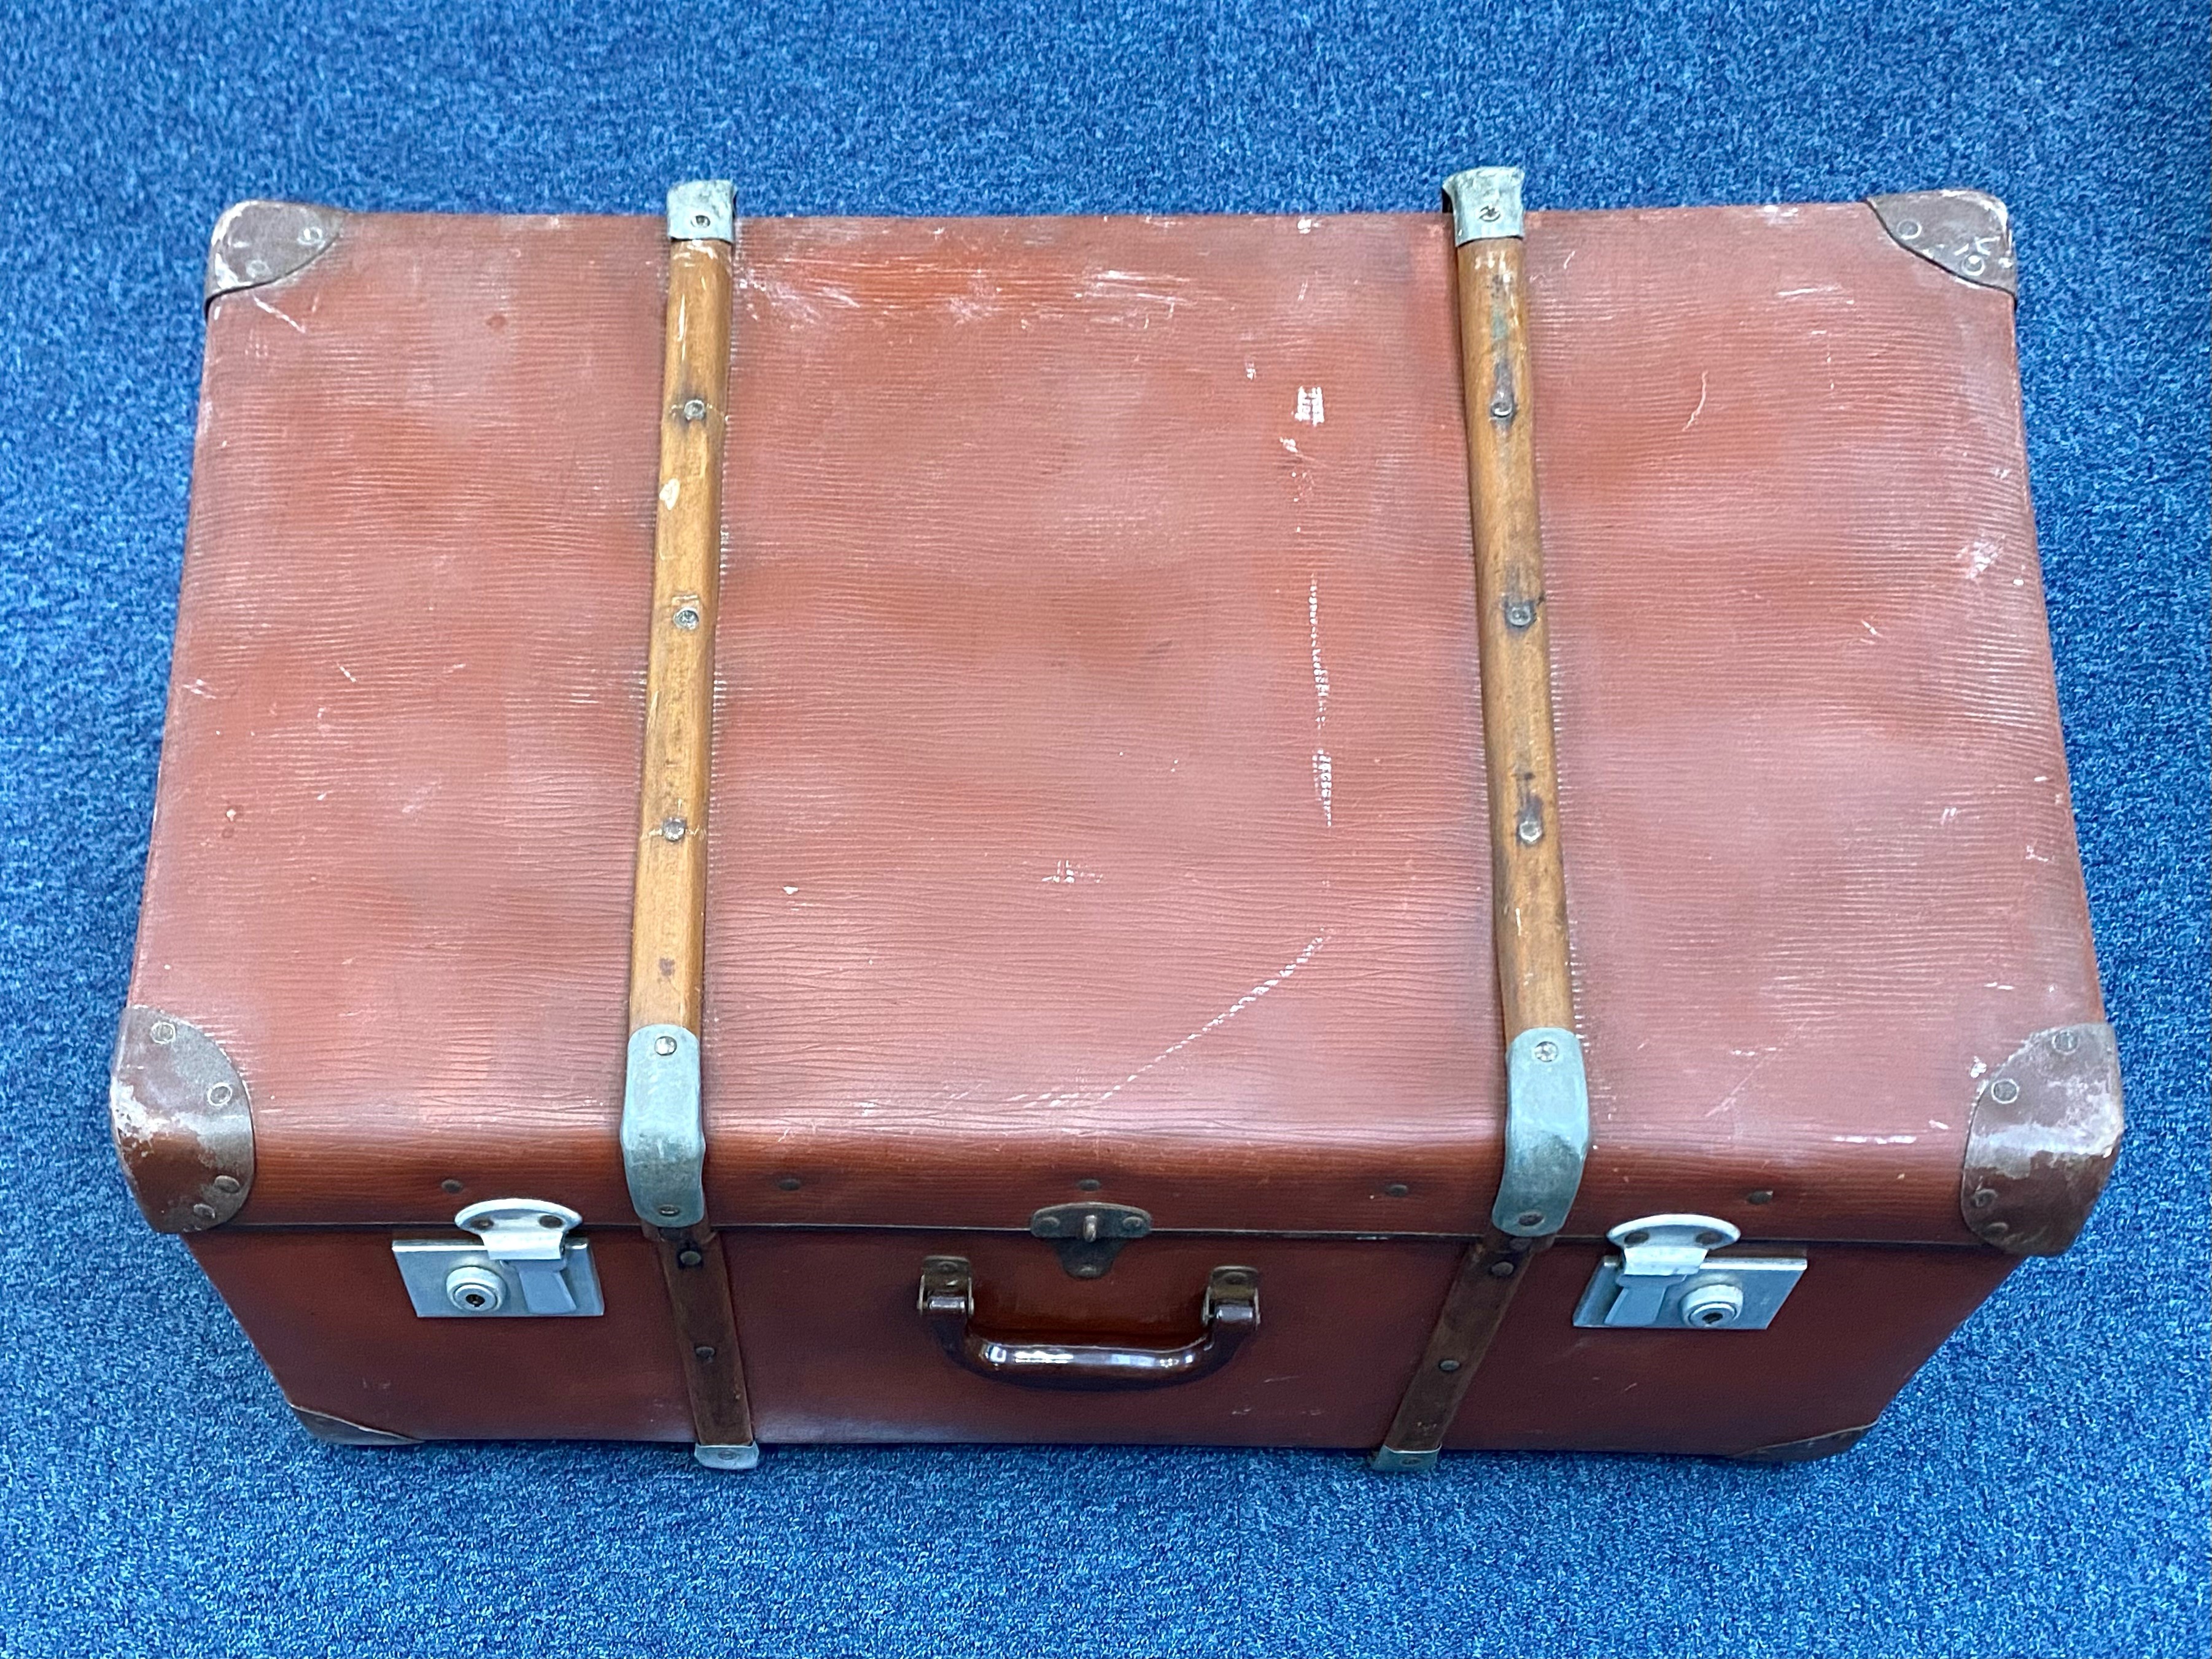 Large Vintage Suitcase, brown with strap - Image 2 of 4